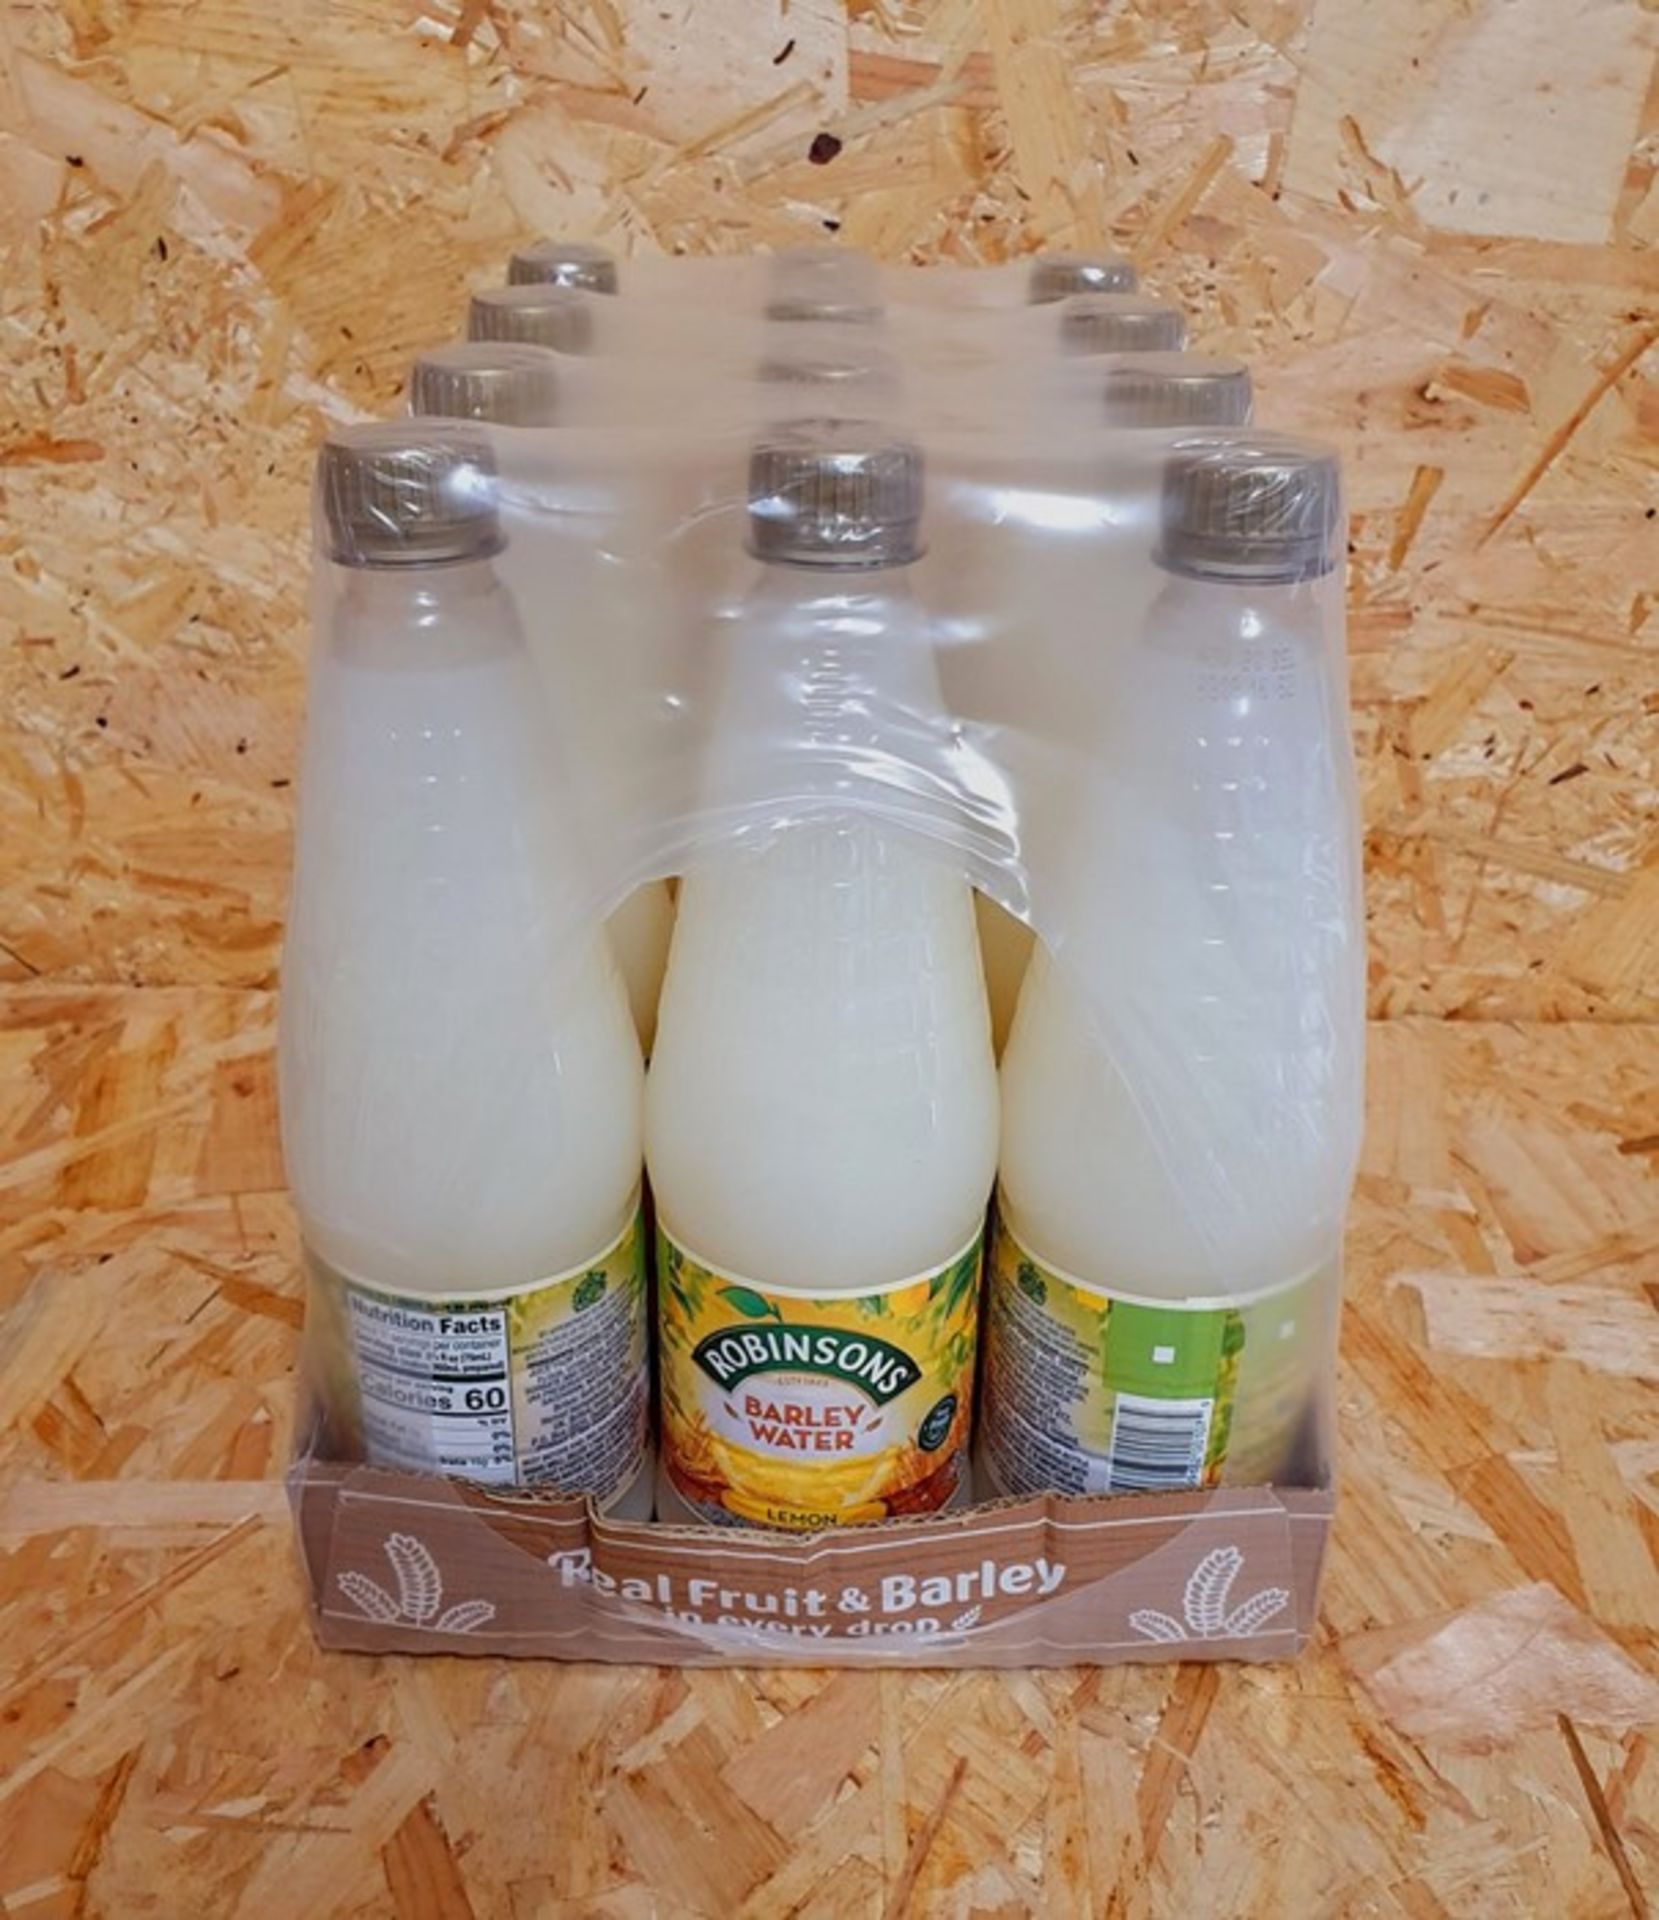 ONE LOT TO CONTAIN ONE CASE OF ROBINSONS FRUIT AND BARLEY BARLEY WATER - LEMON. 850ML PER BOTTLE, 12